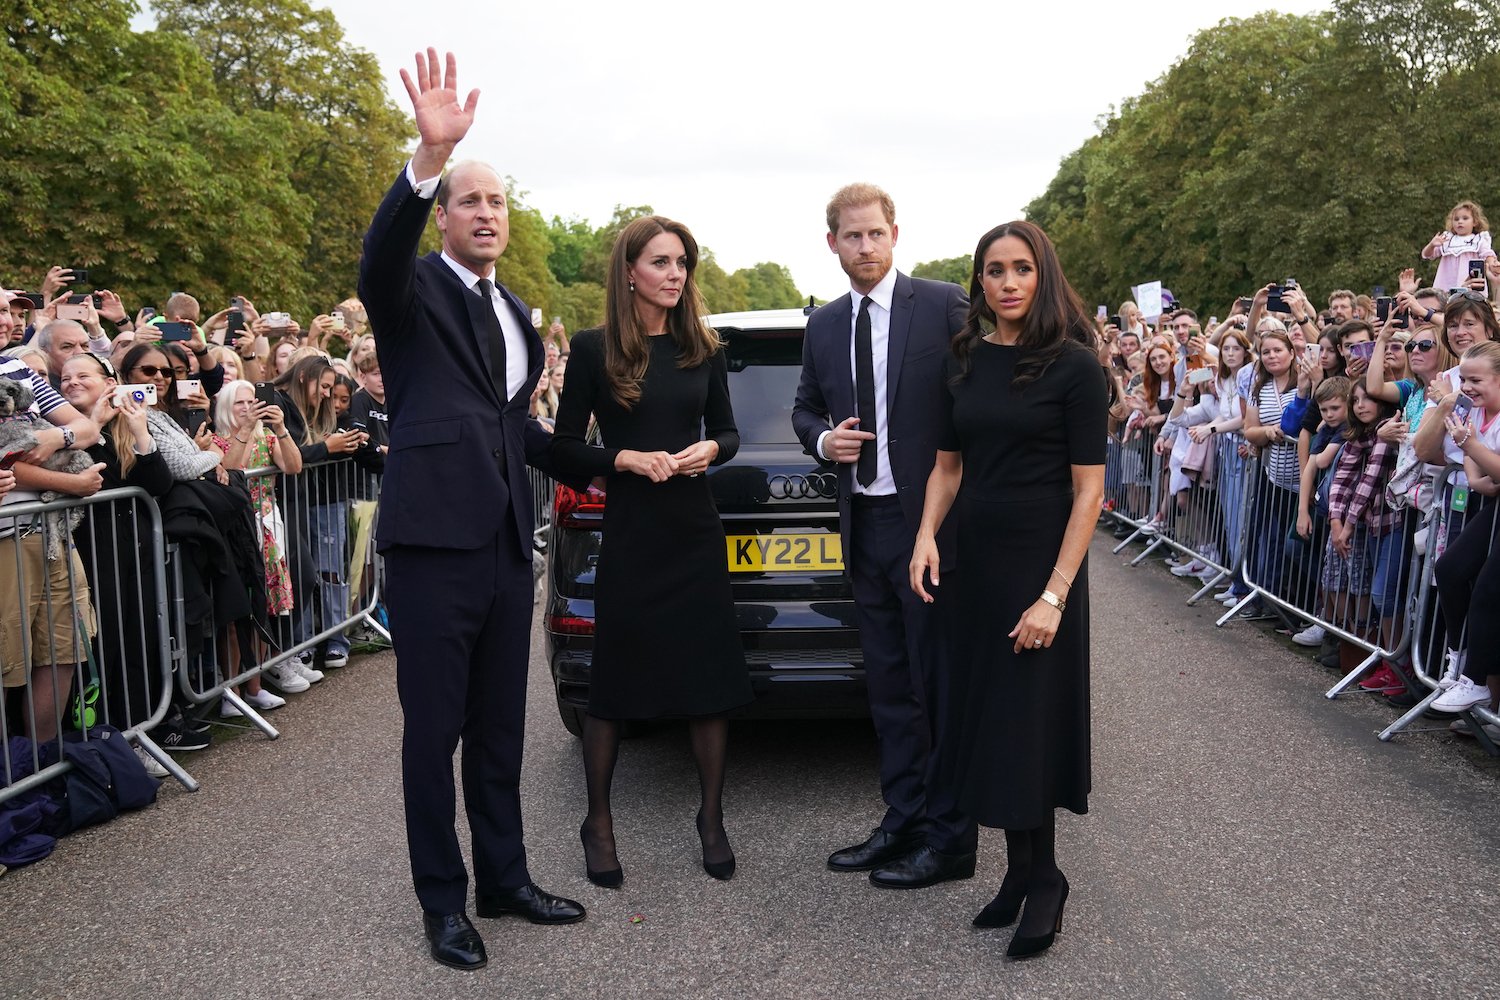 Kate Middleton stared in Meghan Markle's direction while Prince William waved and Meghan and Prince Harry looked to the side